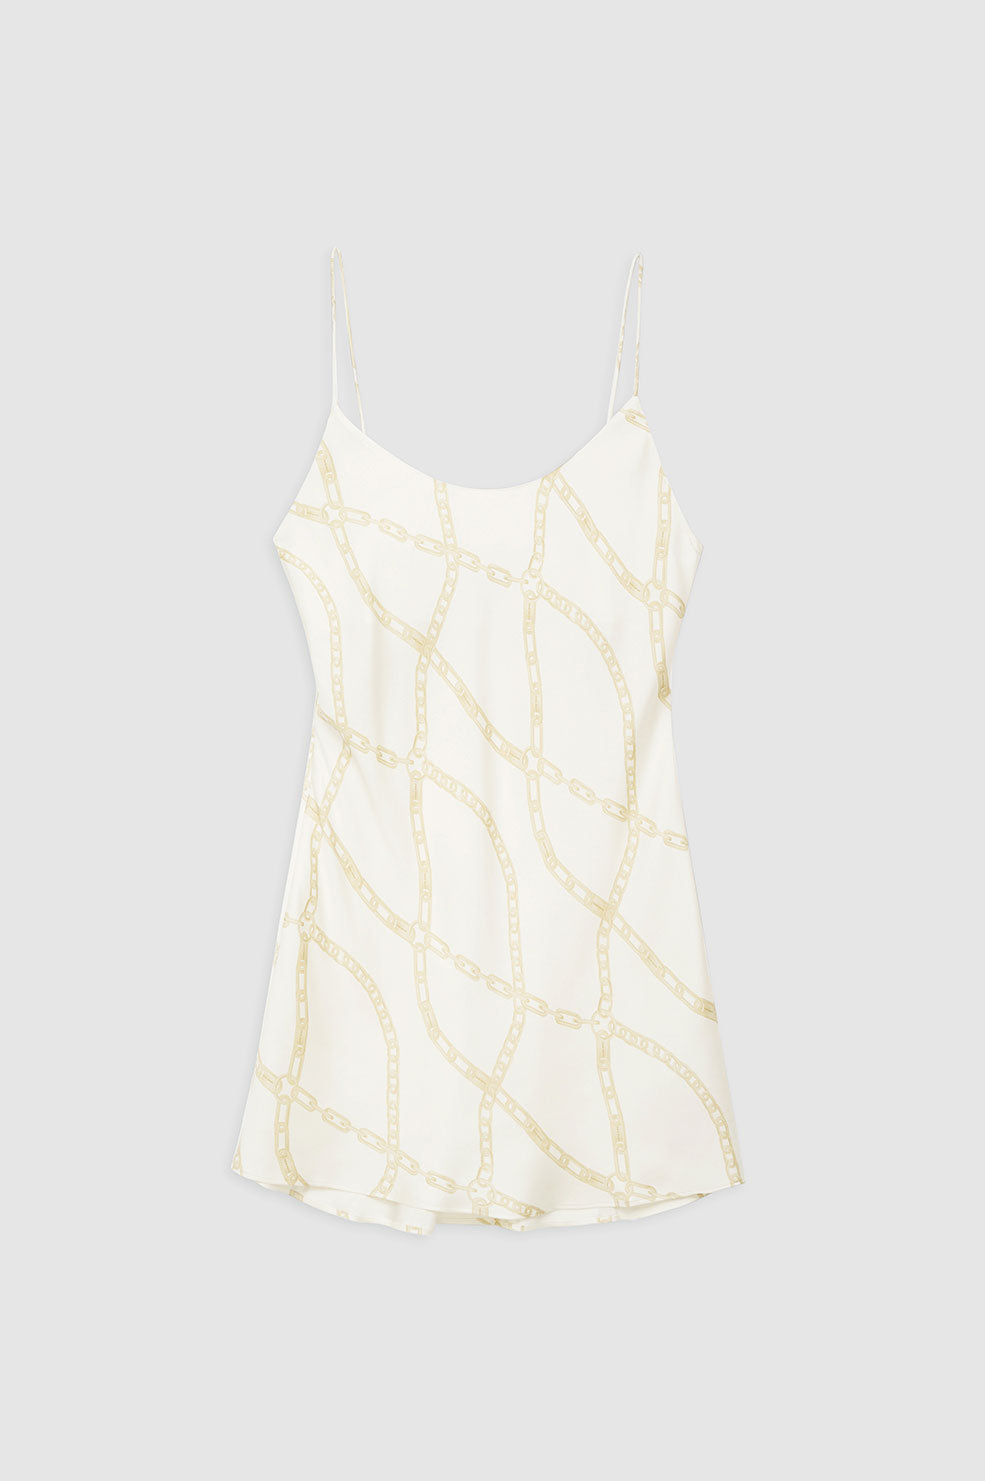 ANINE BING Lisette Slip Dress - Cream And Tan Link Print - Front View